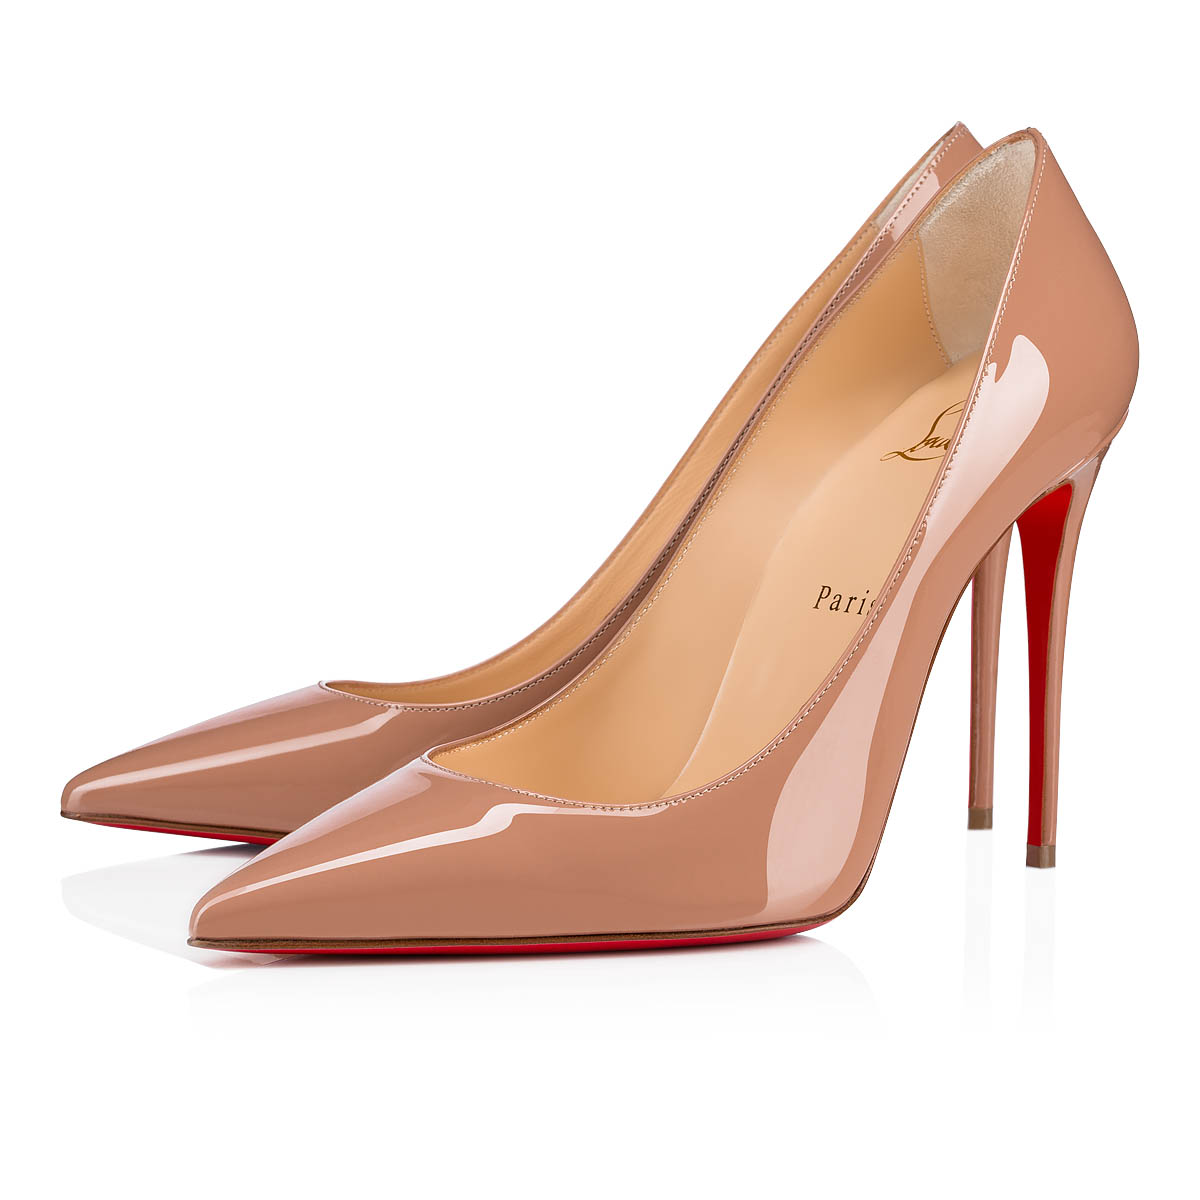 Patent leather sandal Christian Louboutin Pink size 36 EU in Patent leather  - 40904062